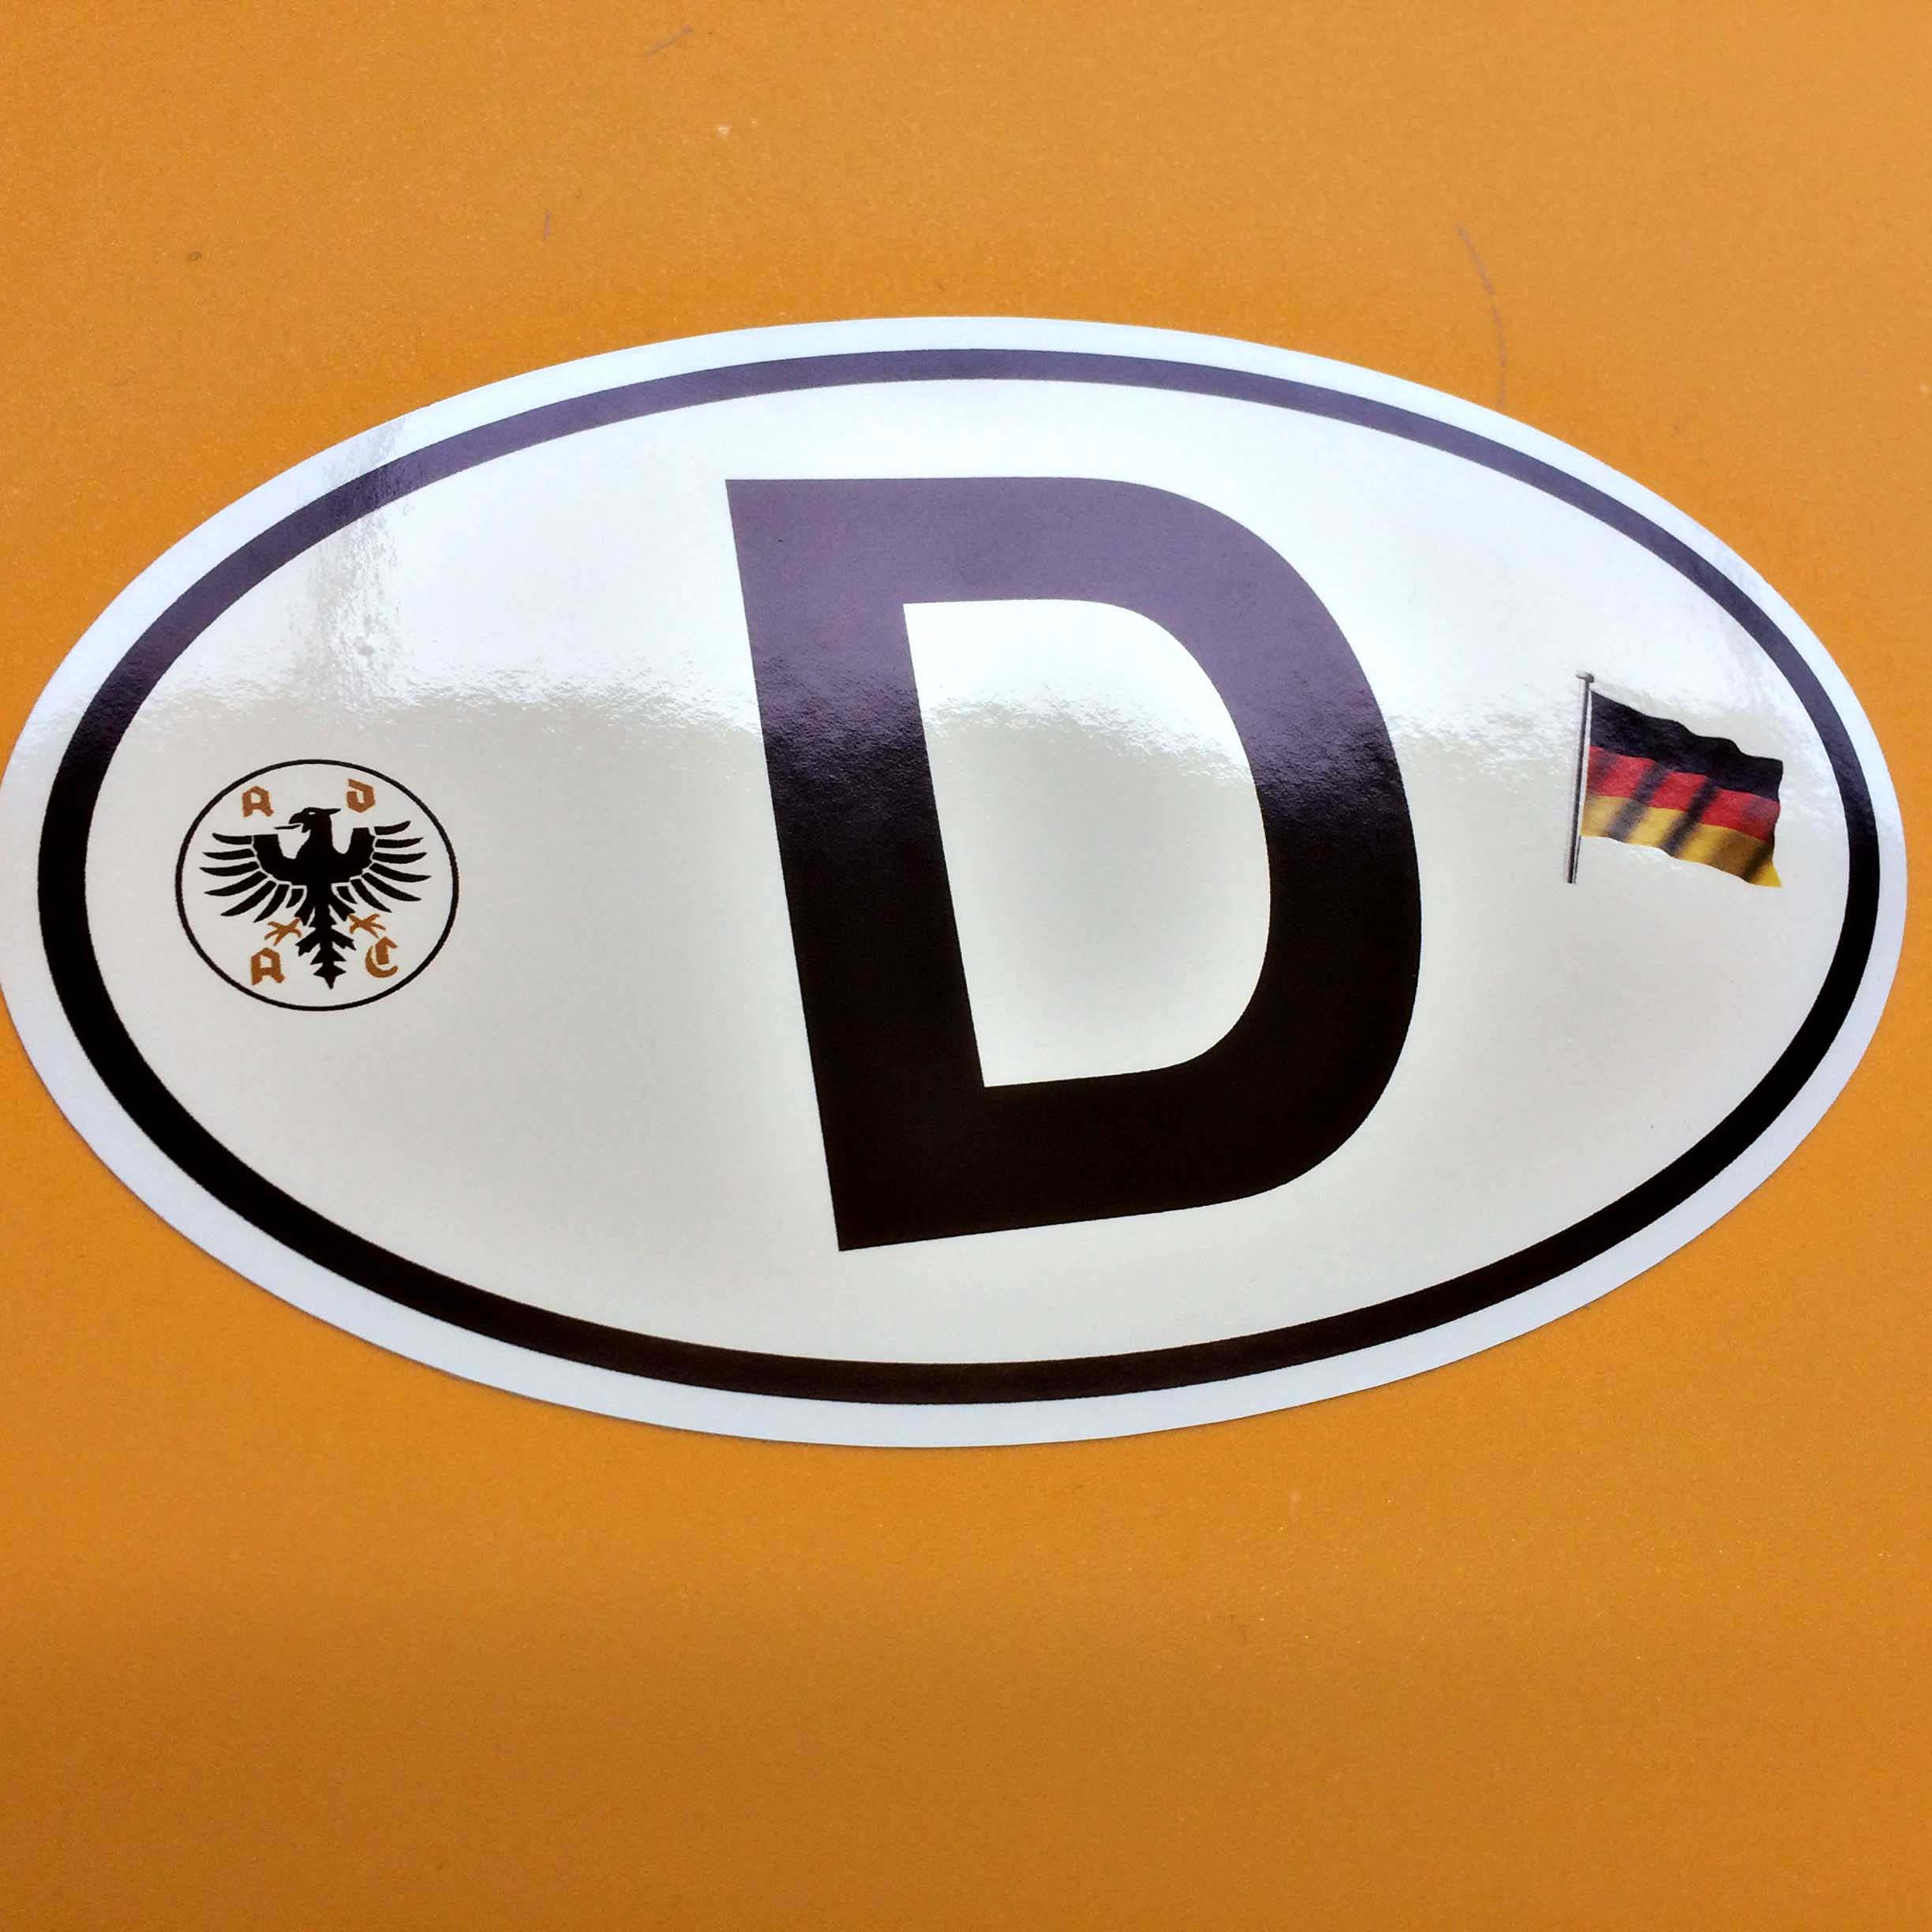 D in bold black lettering on a white oval sticker with a black border. Either side of the letter D are the German flag, three horizontal bands of black, red and gold and the ADAC, the German Automobile Club logo, a black eagle surrounded by gold letters ADAC.